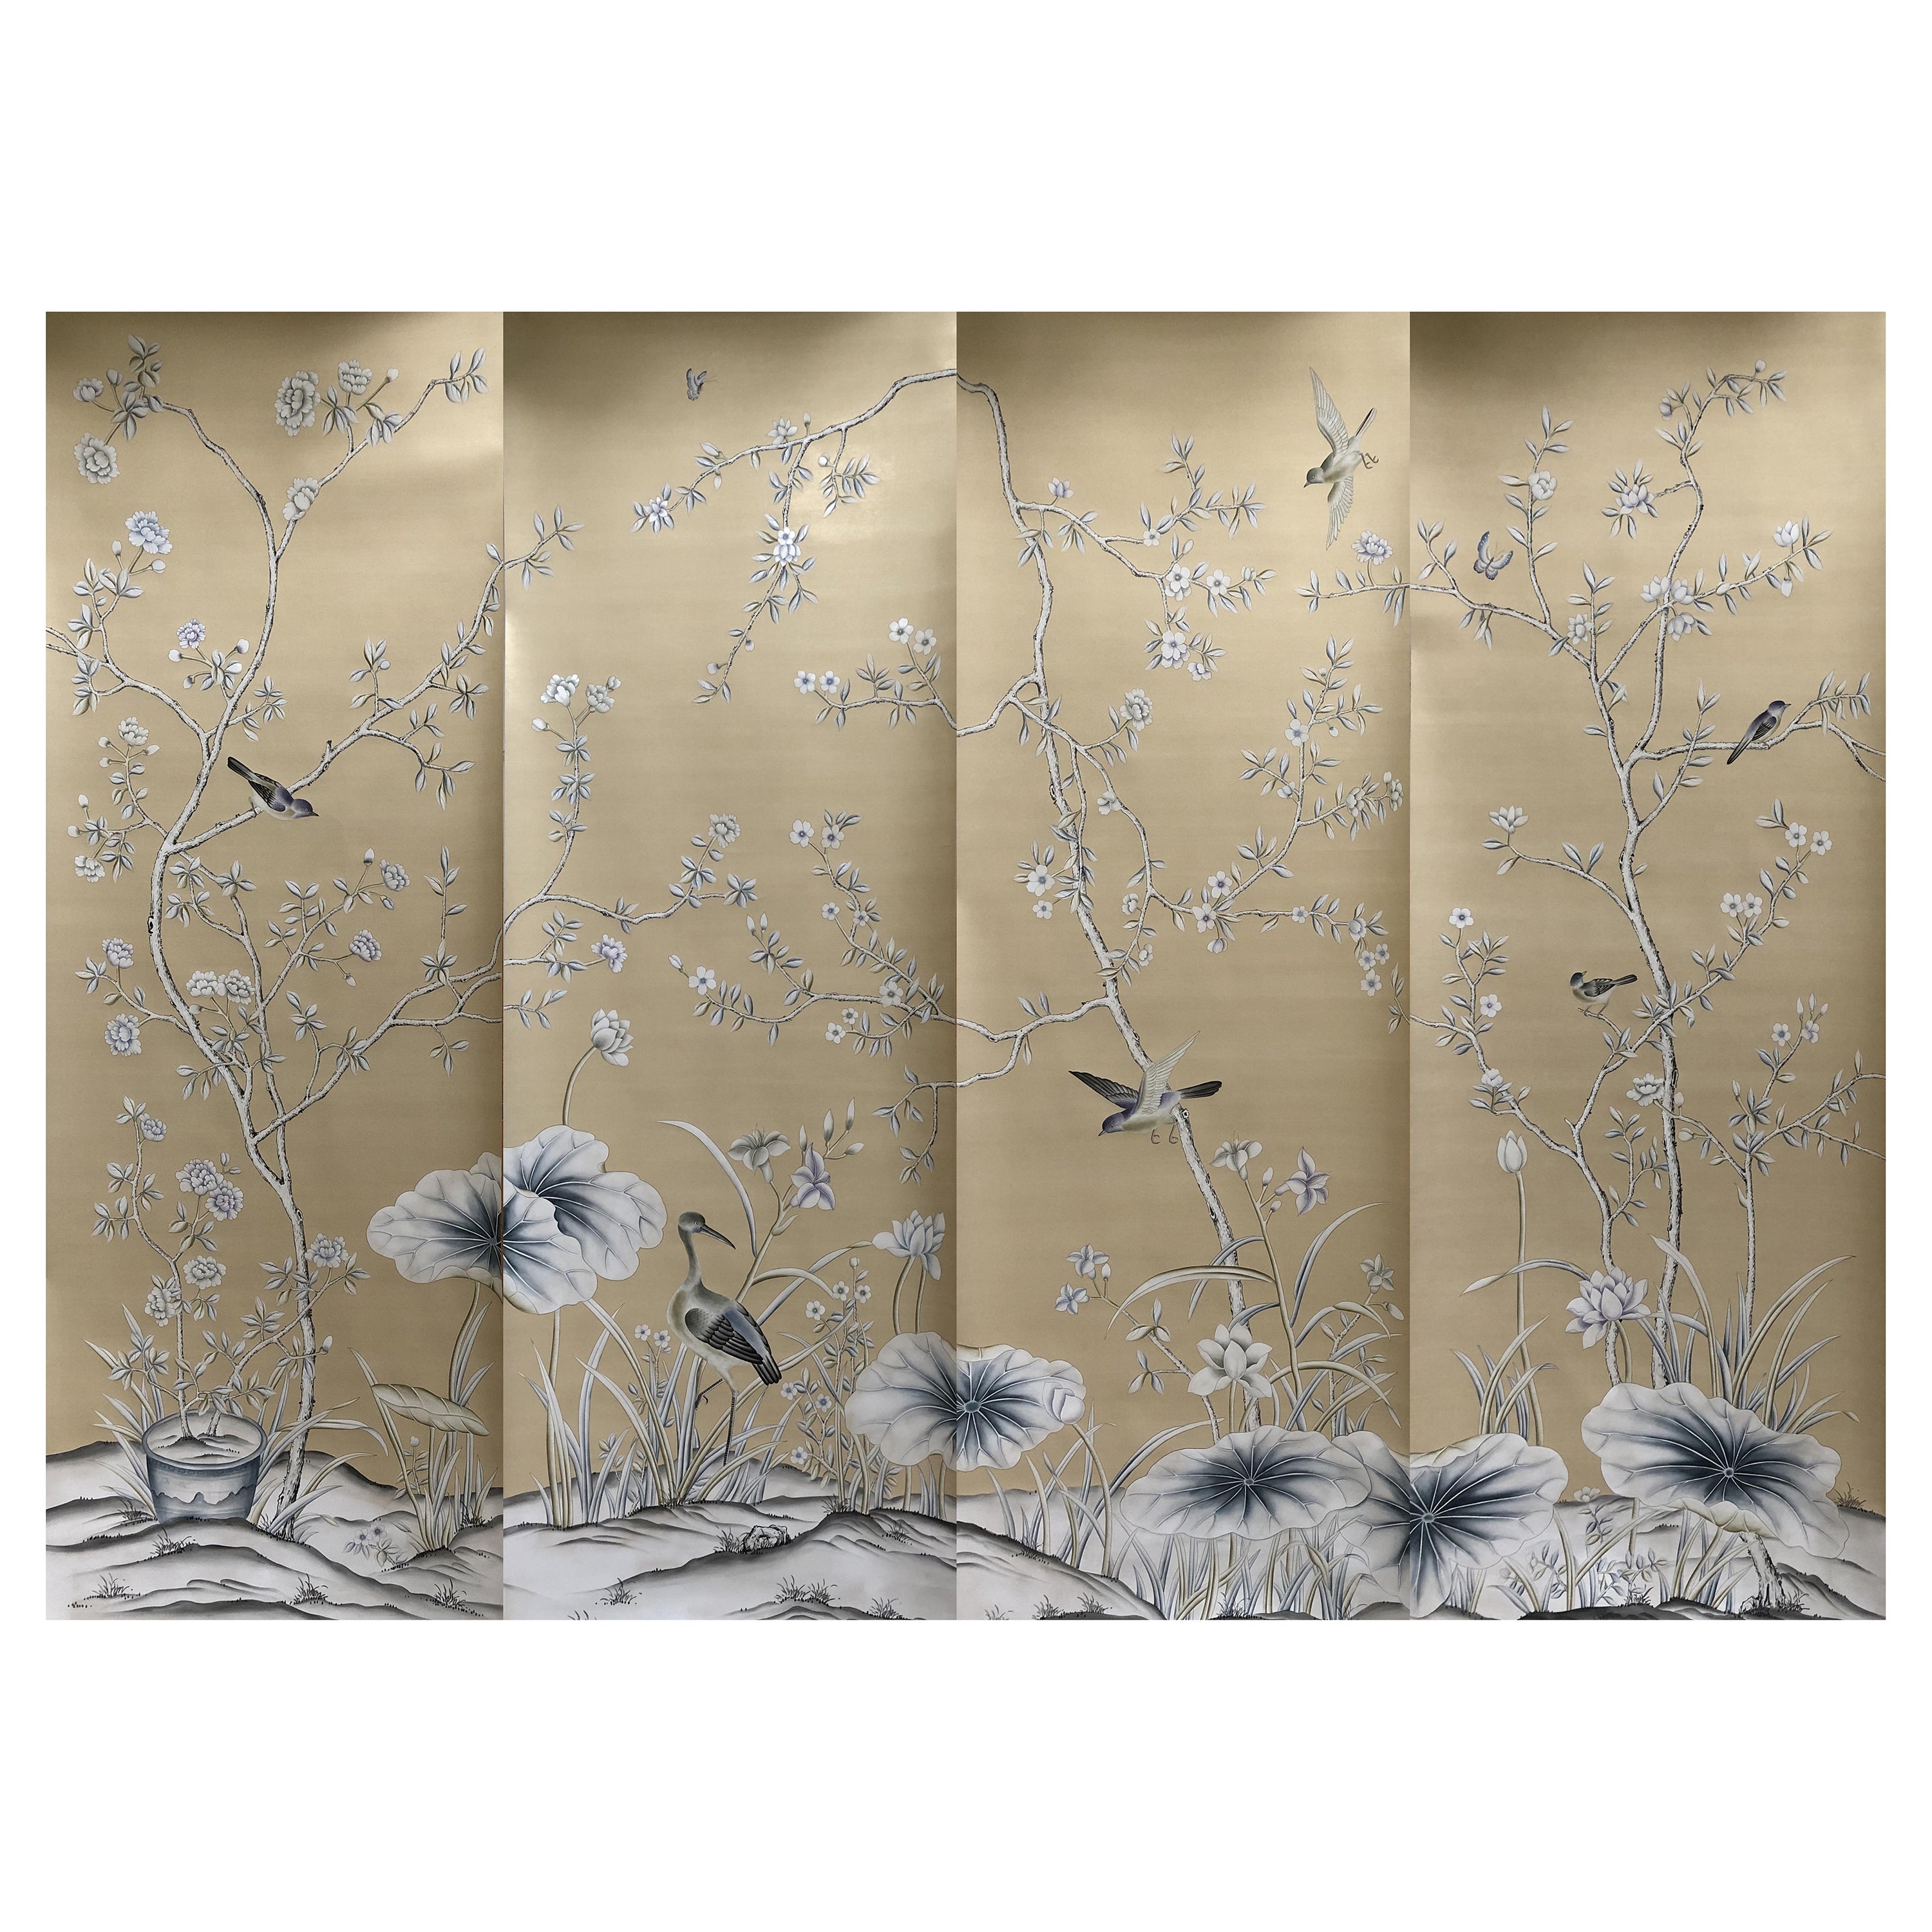 Chinoiserie Murals Chinoiserie Wallpaper Hand Painted Silk Wallpaper For Sale